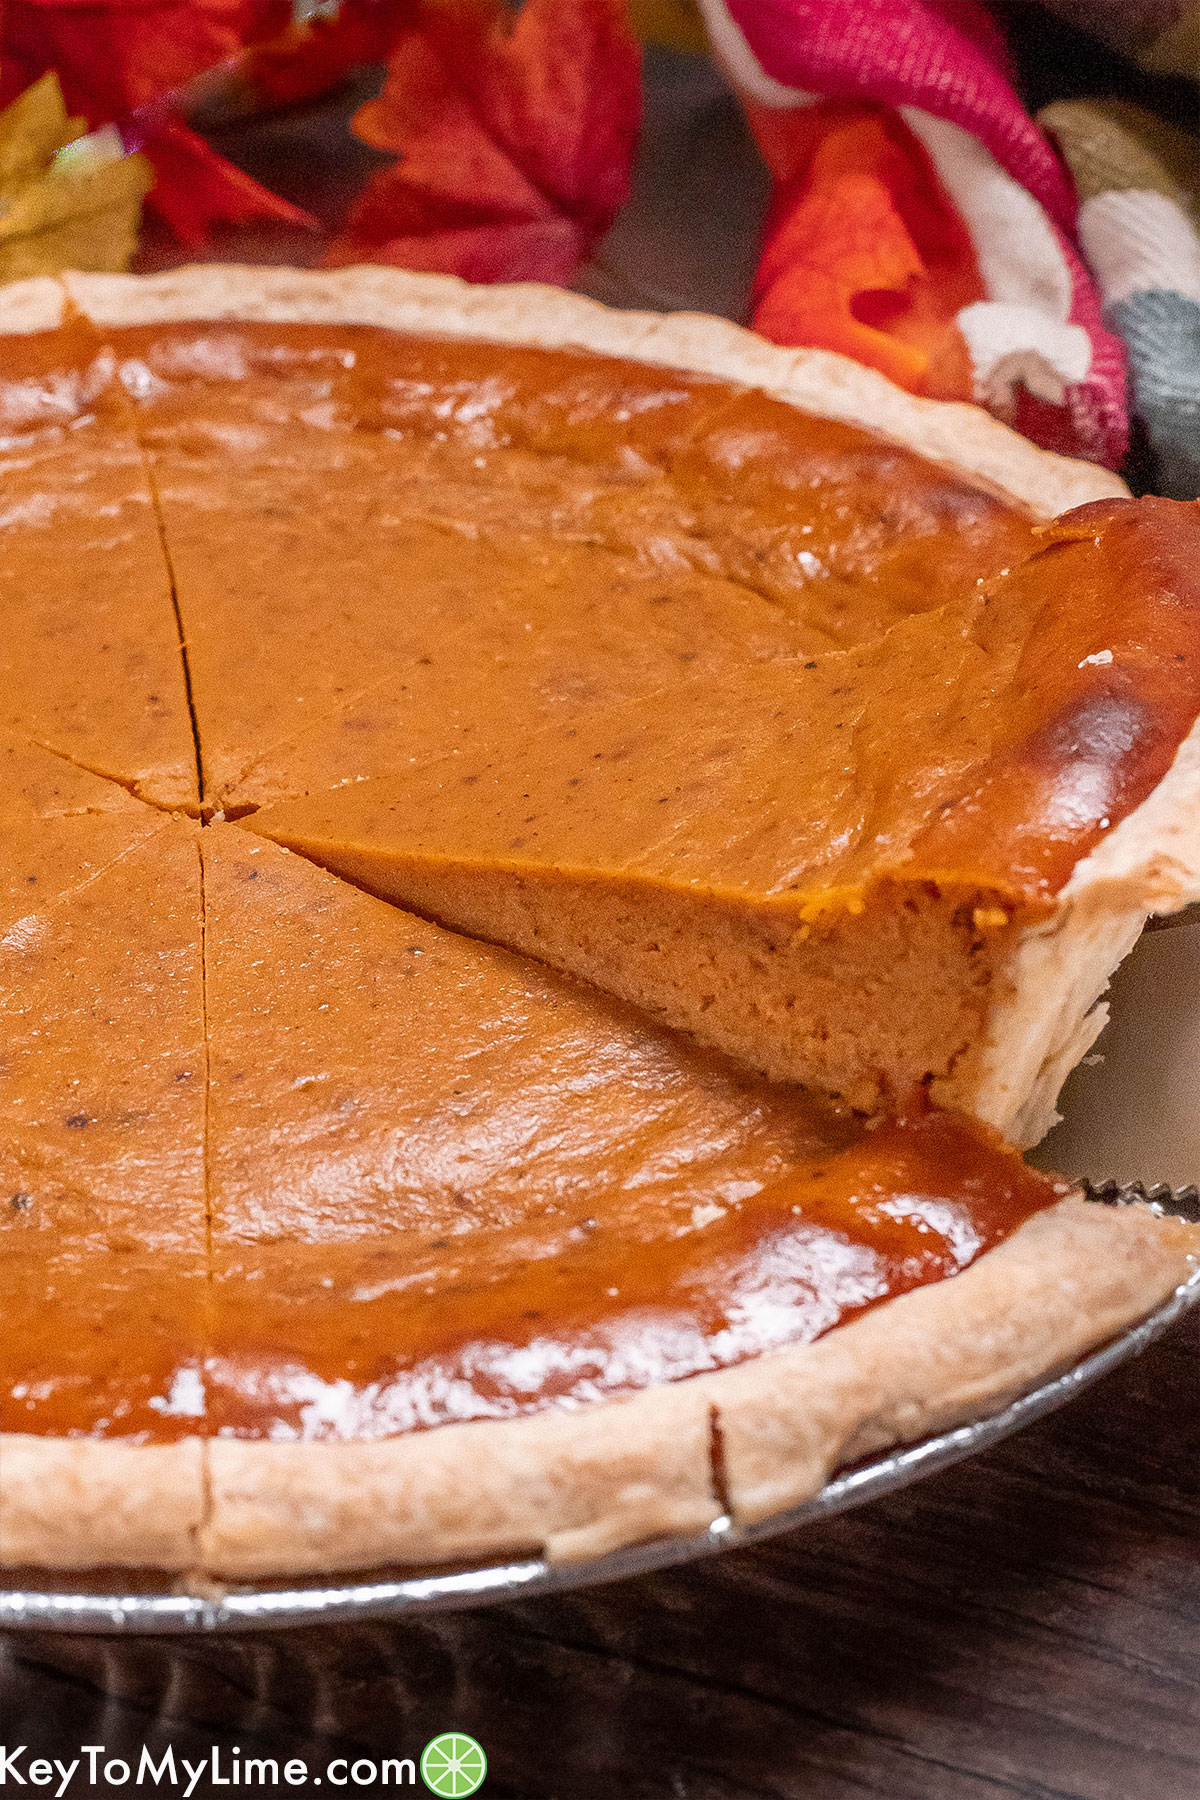 A slice of pumpkin pie being lifted out of a pie dish.